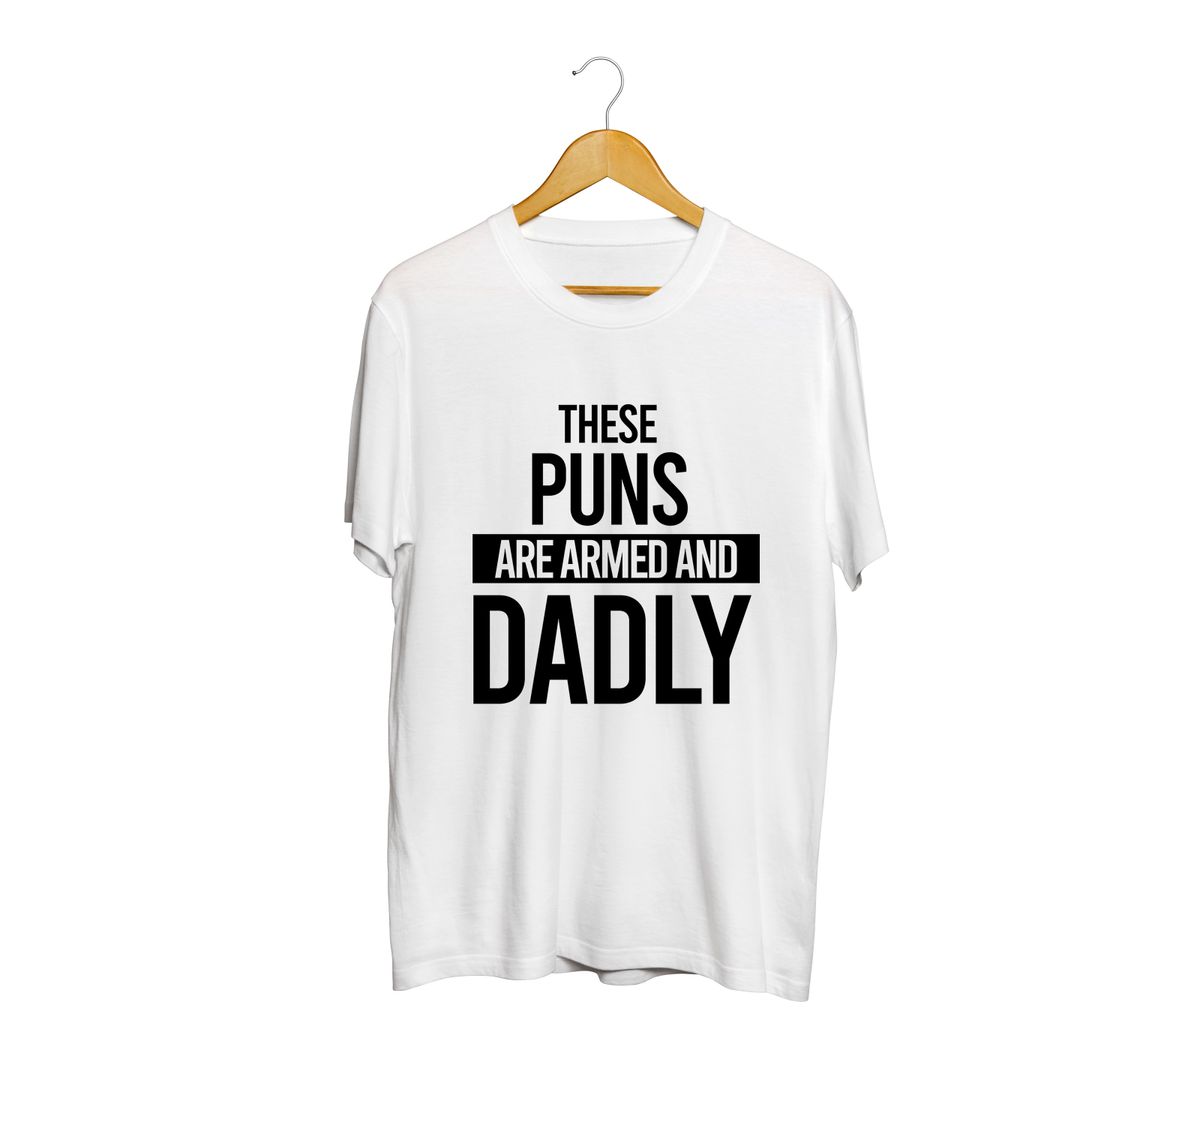 Fan Made Fits Dad Jokes White Dadly T-Shirt image 1